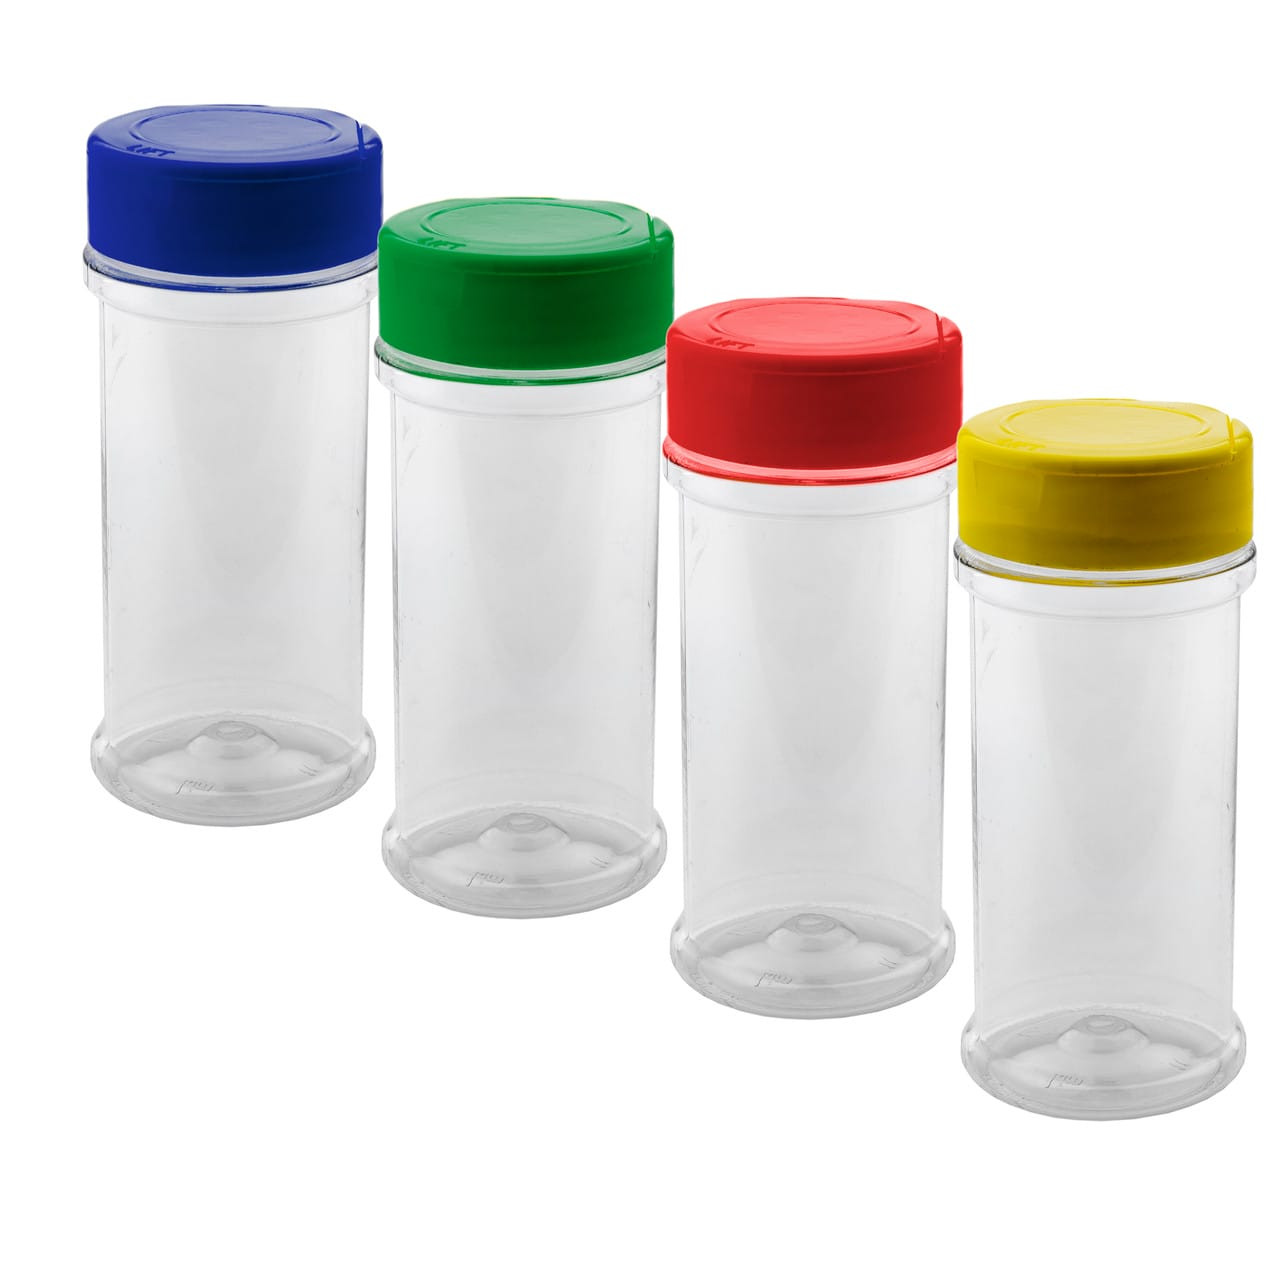 6oz clear plastic spice jars containers